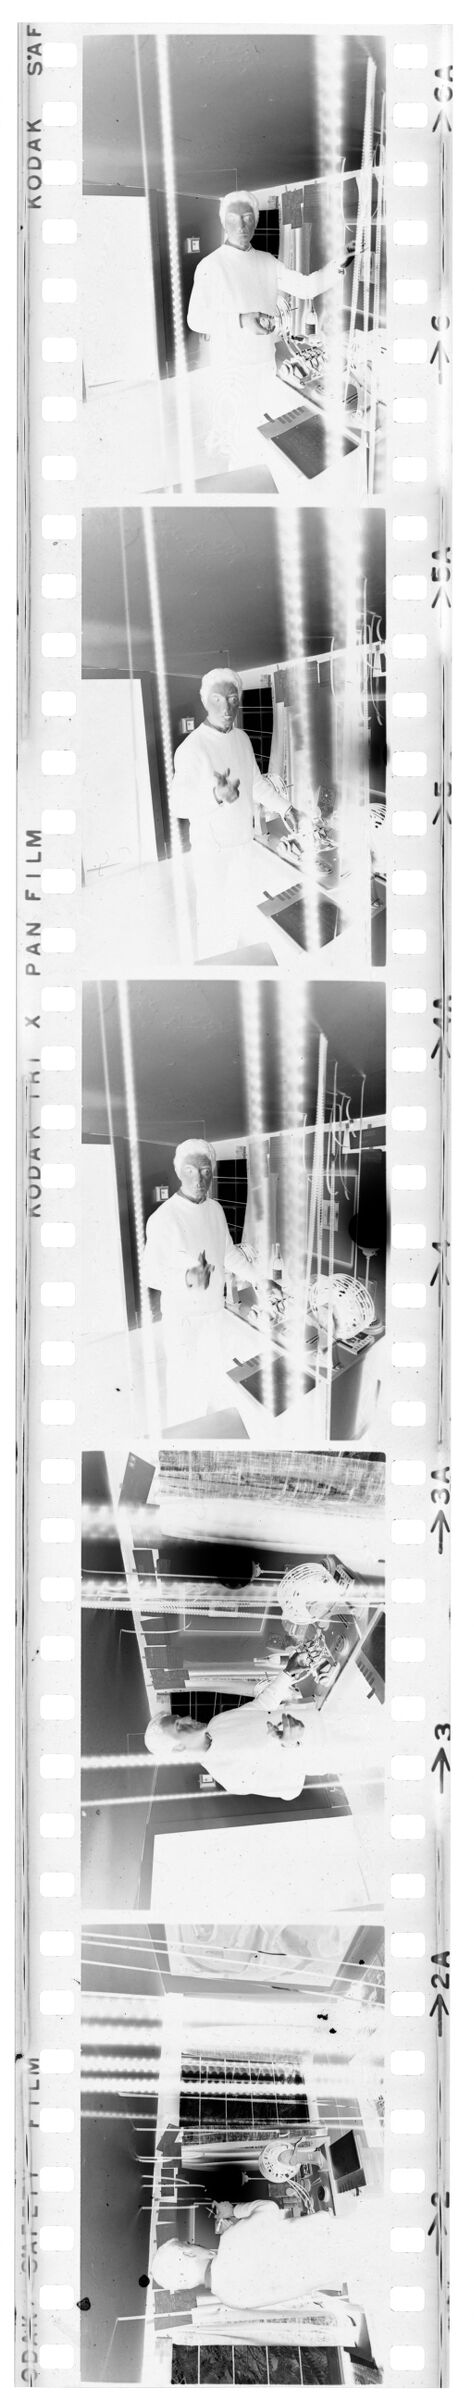 Untitled (Photographer Cutting And Hanging Film)